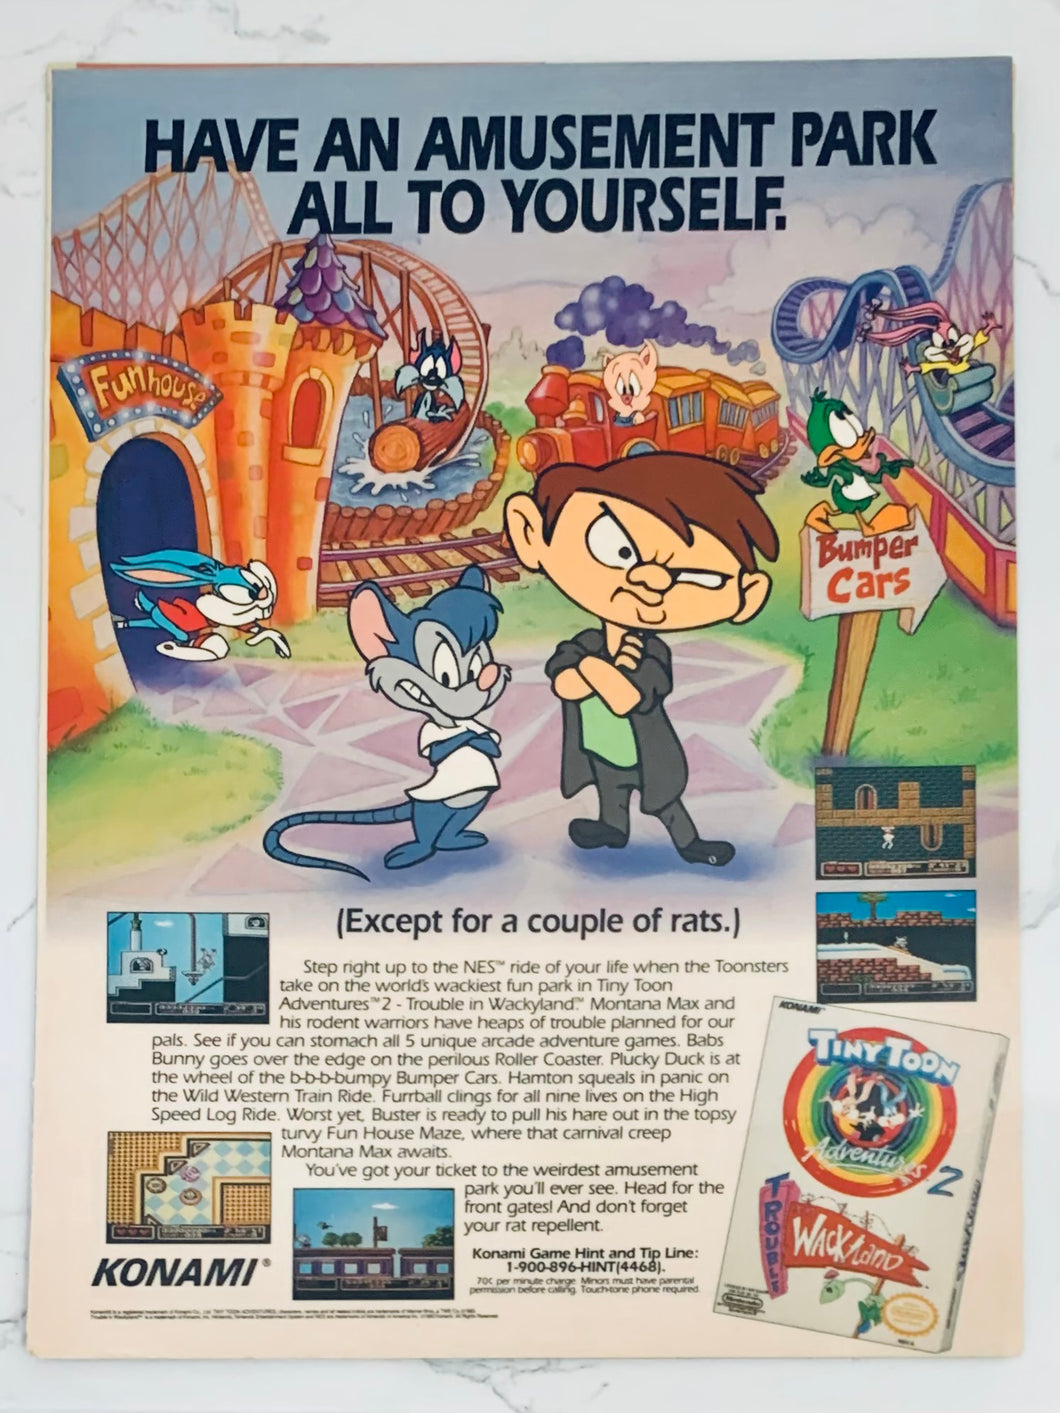 Tiny Toon Adventures 2: Trouble in Wackyland - NES - Original Vintage Advertisement - Print Ads - Laminated A4 Poster